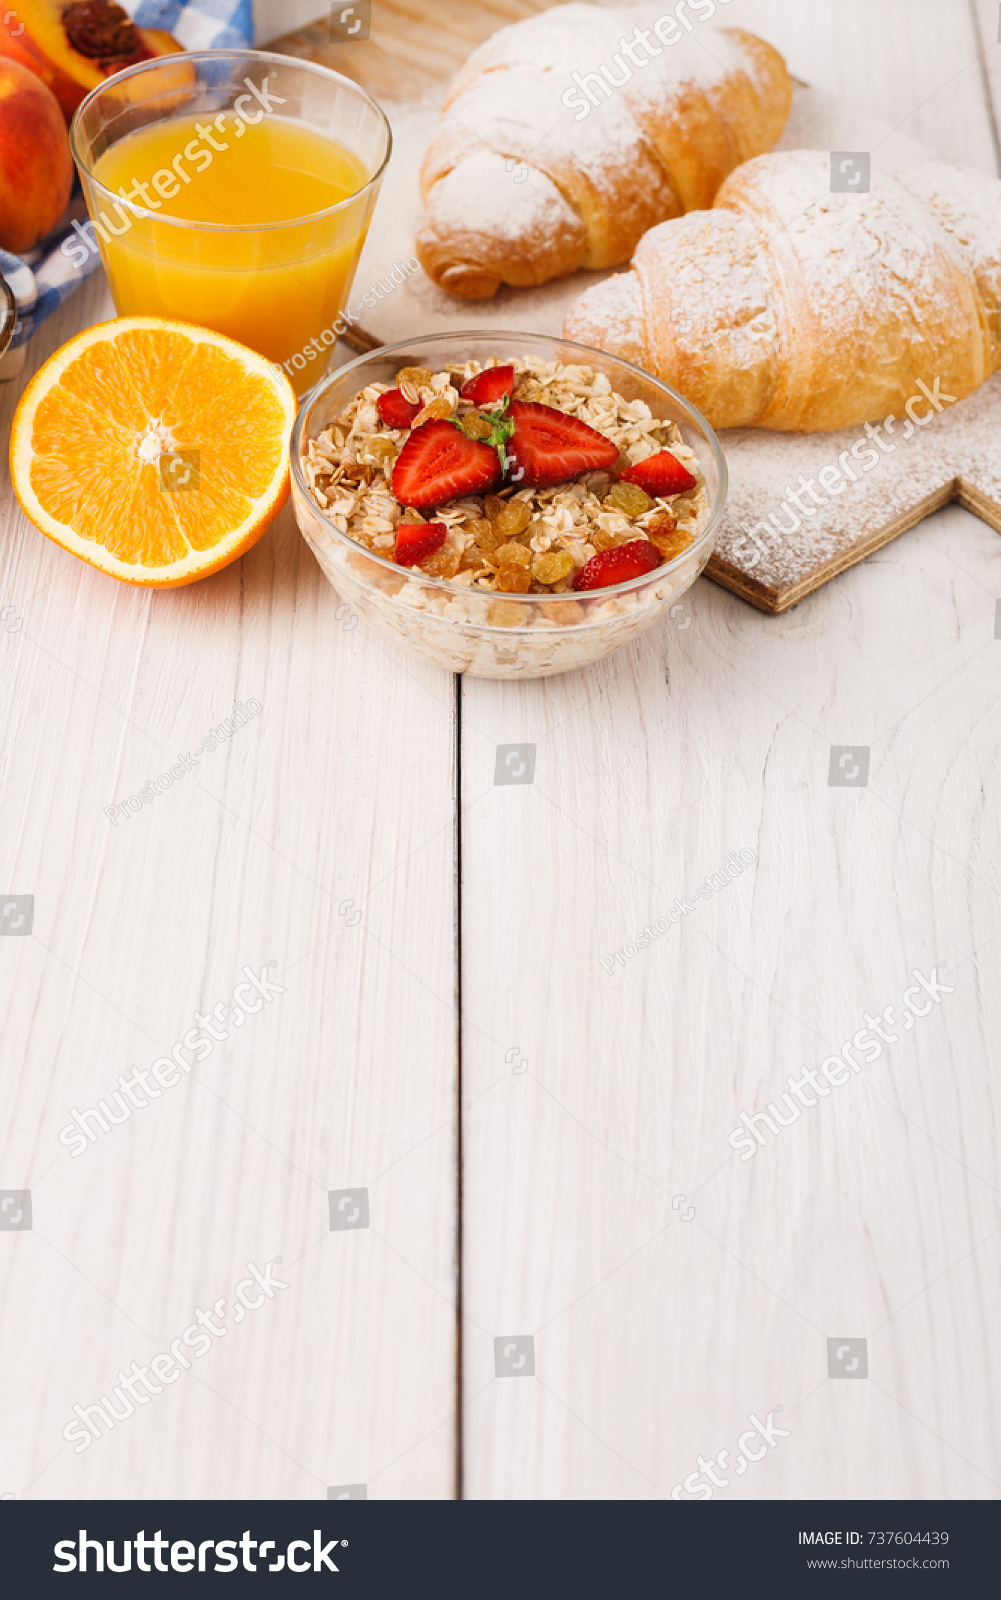 Traditional french breakfast menu . Yogurt with fresh berries, glass of orange juice, muesli and croissants on wooden table, copy space #737604439